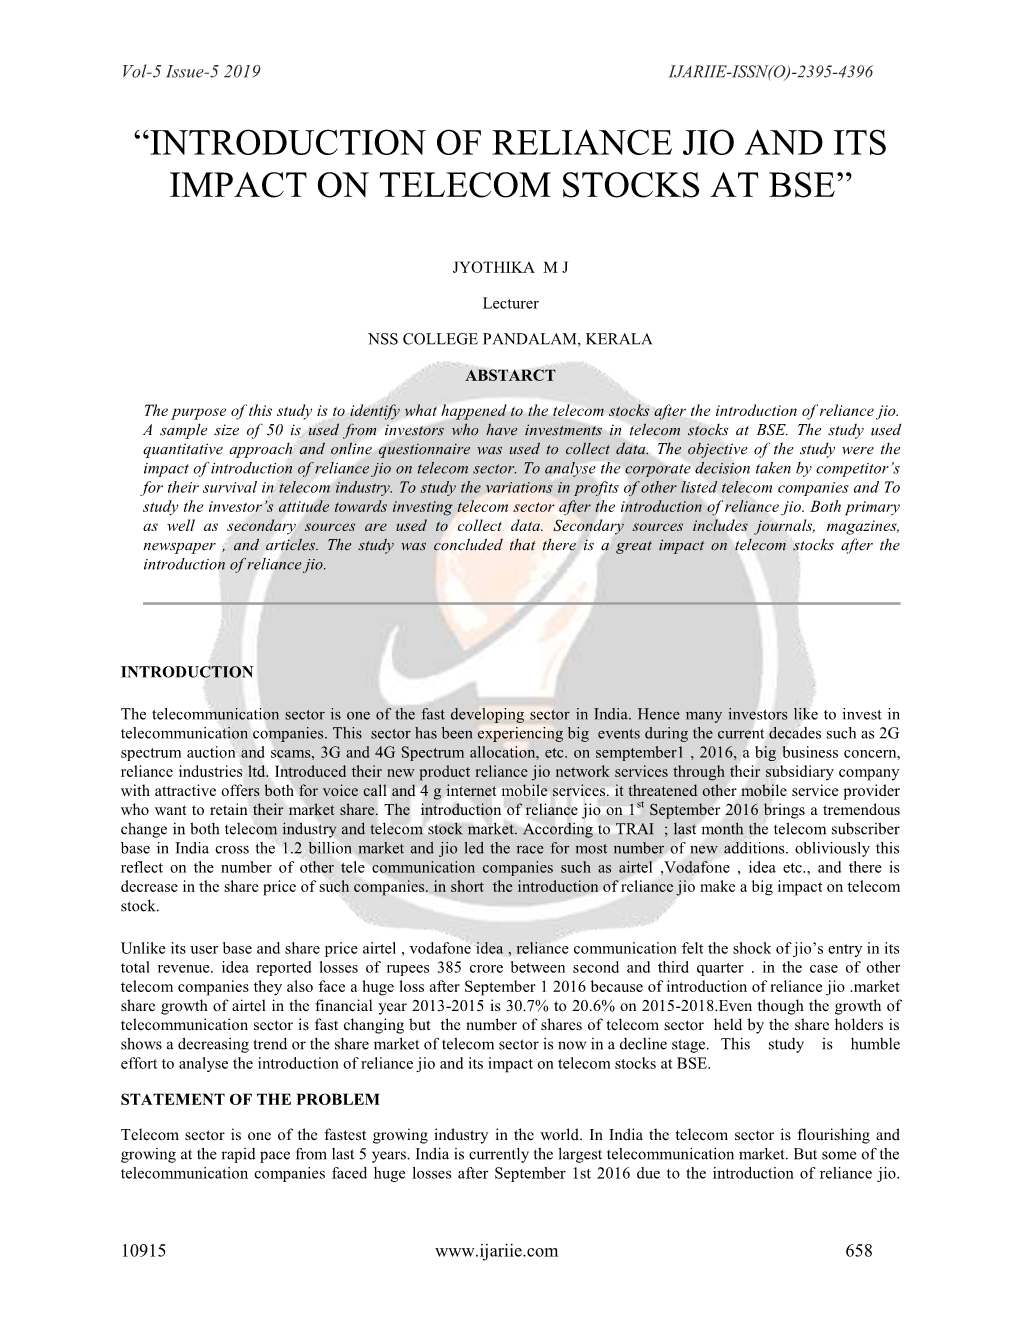 “Introduction of Reliance Jio and Its Impact on Telecom Stocks at Bse”